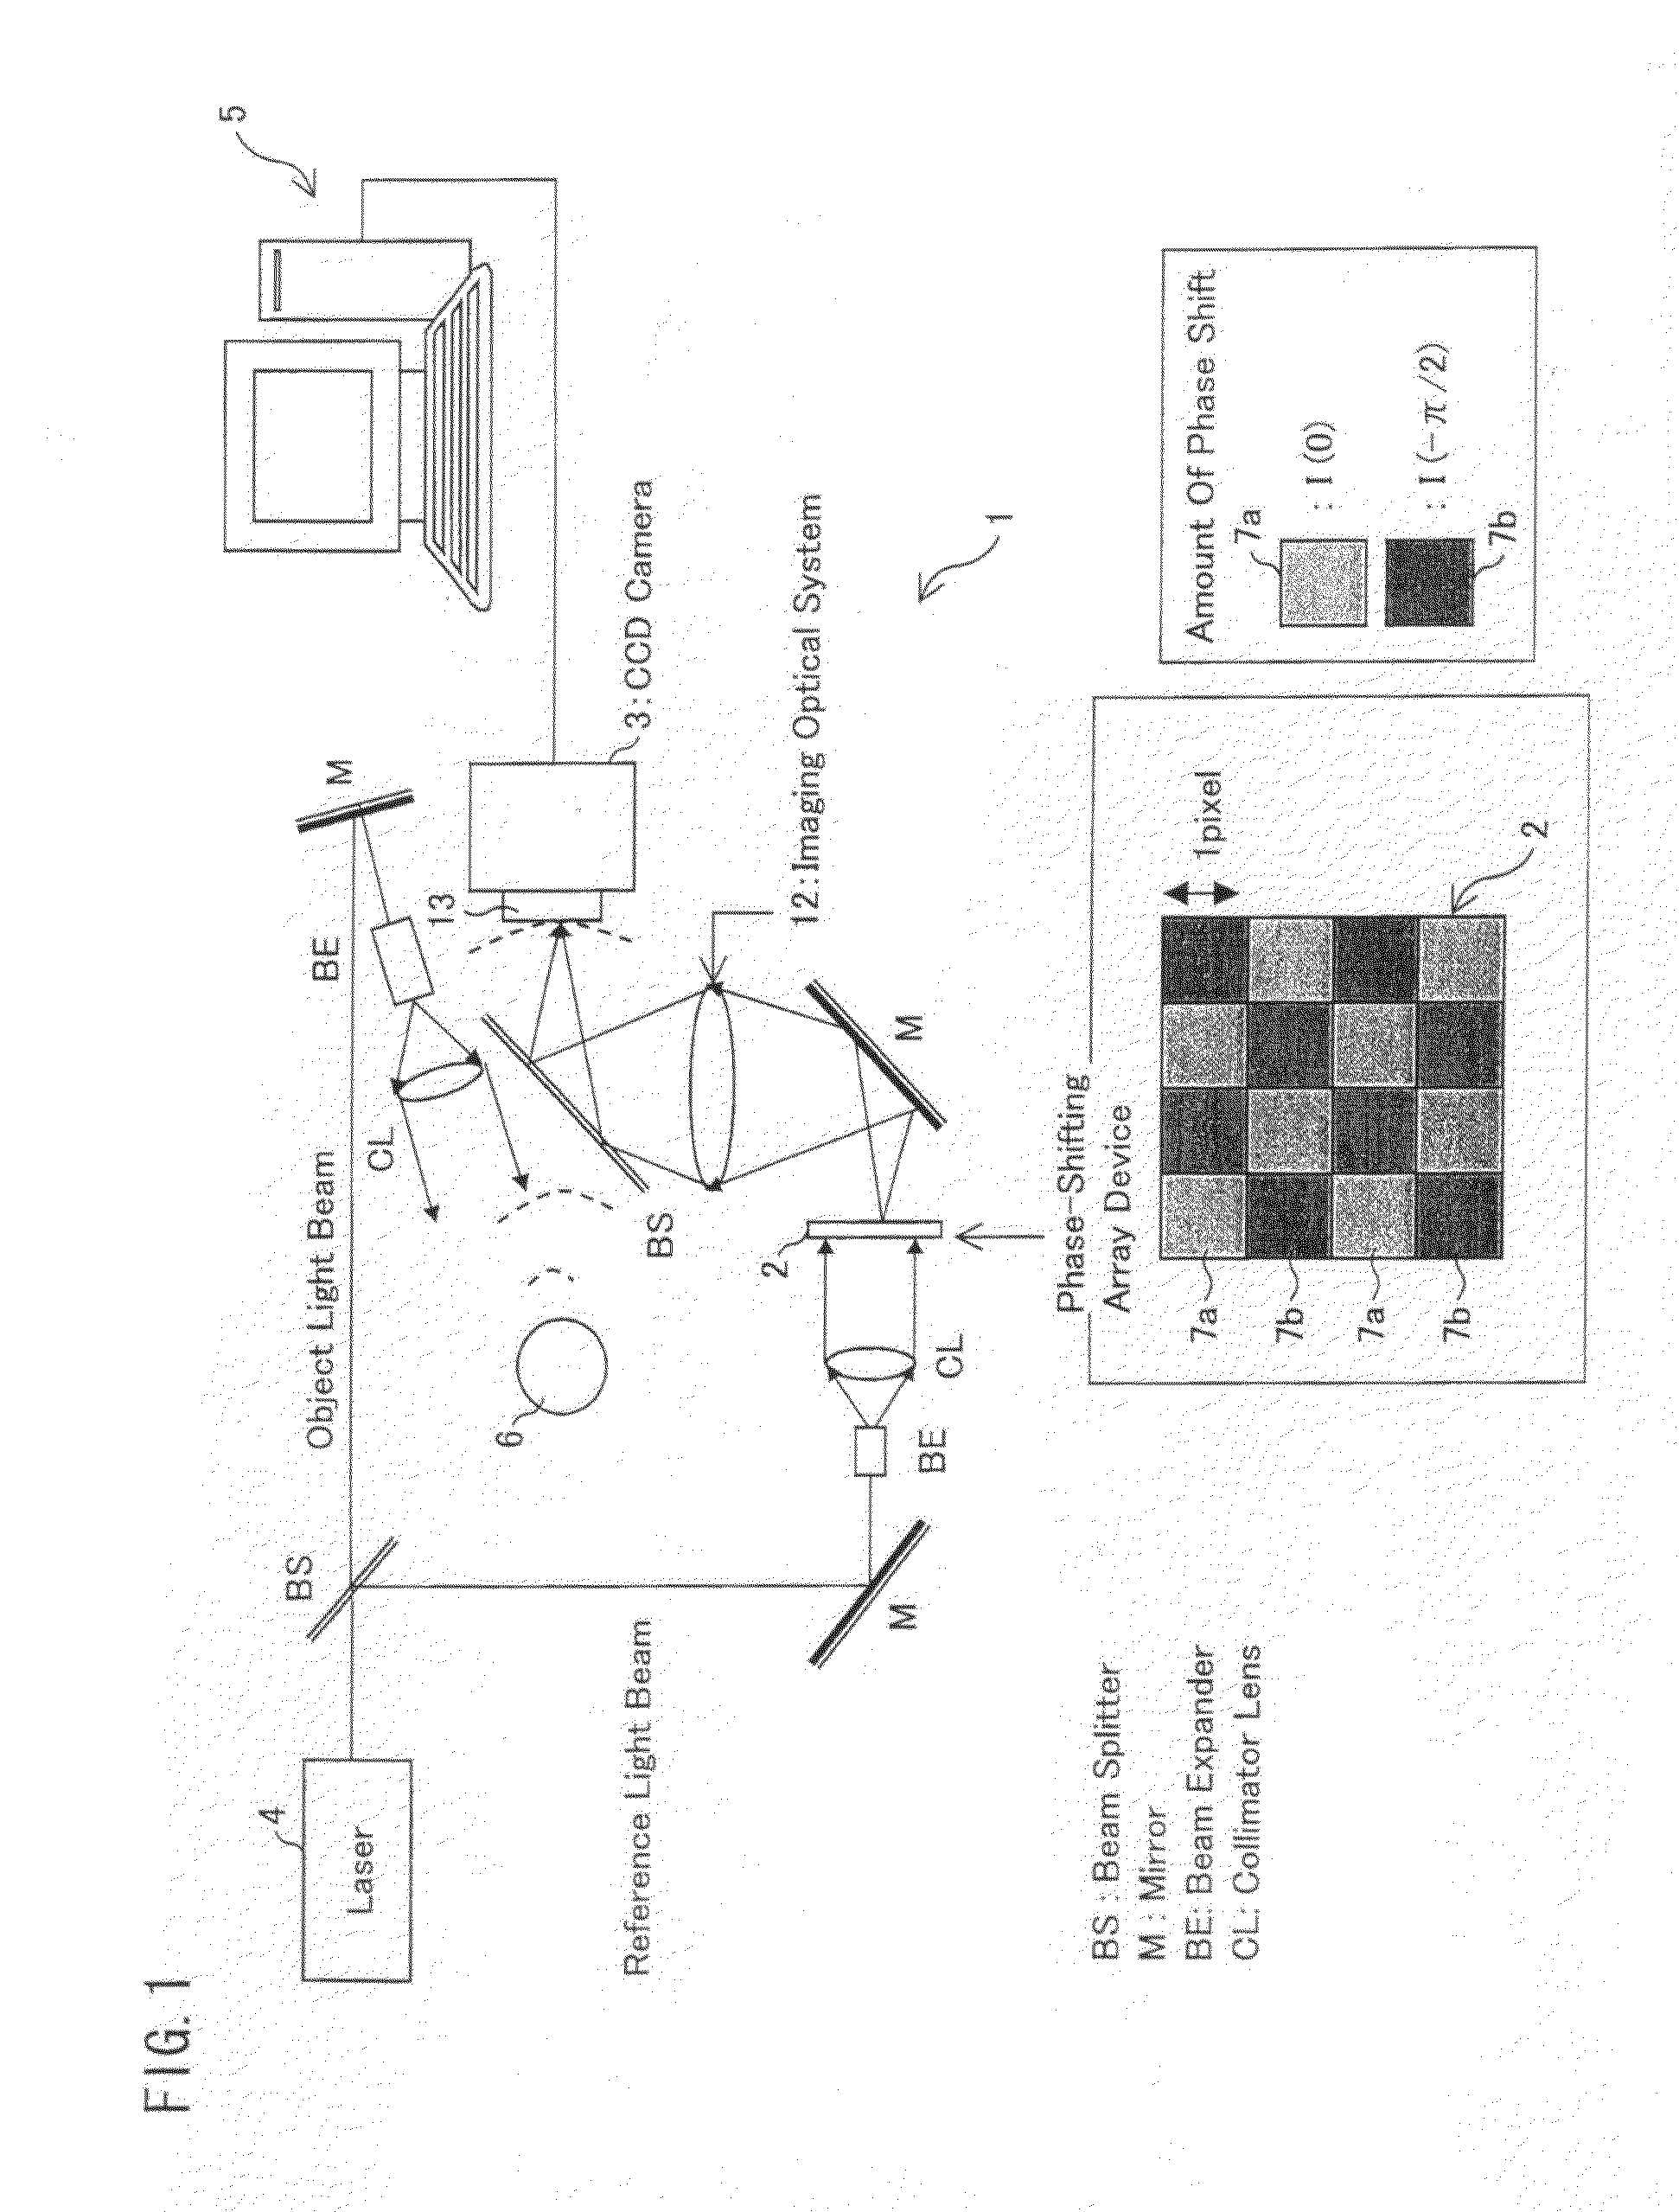 Digital holography device and phase plate array